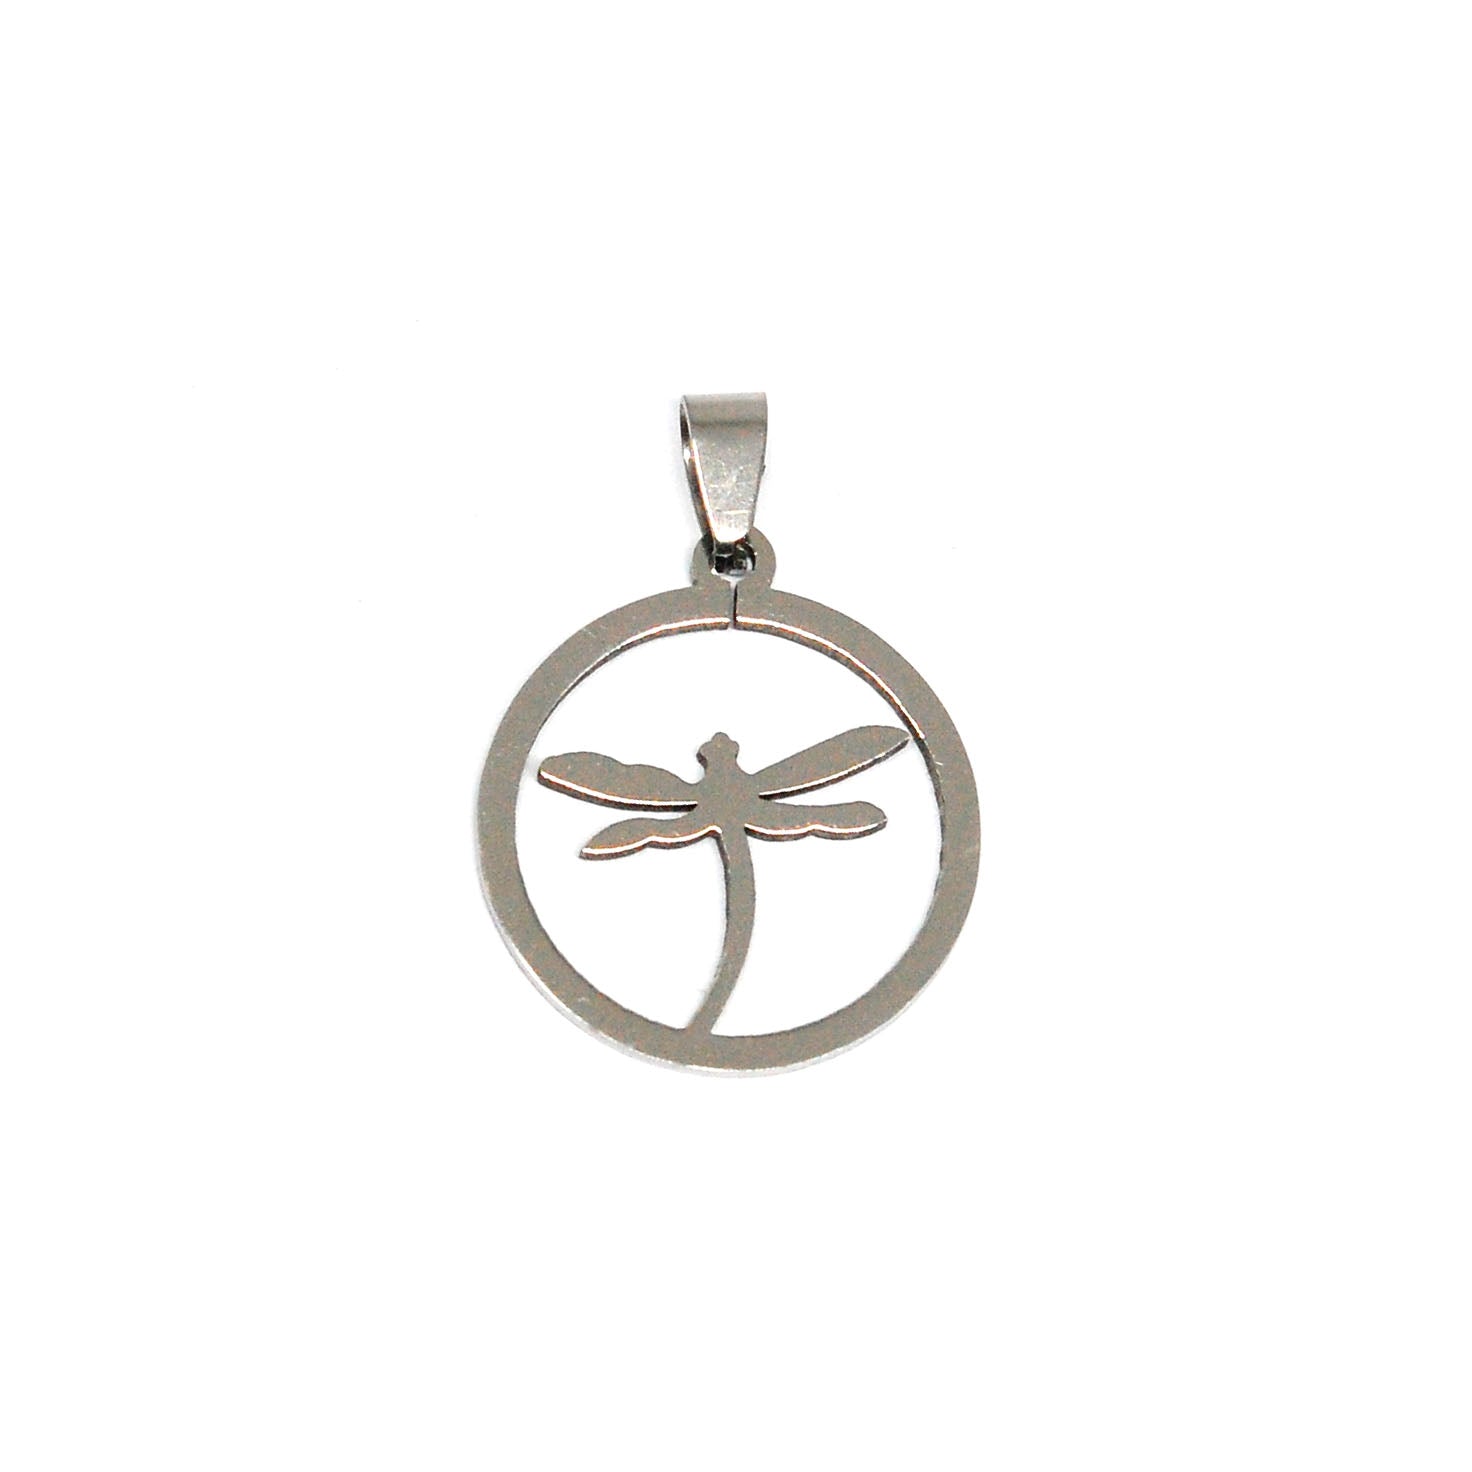 ESP 5059: Firefly in a Circle Pendant